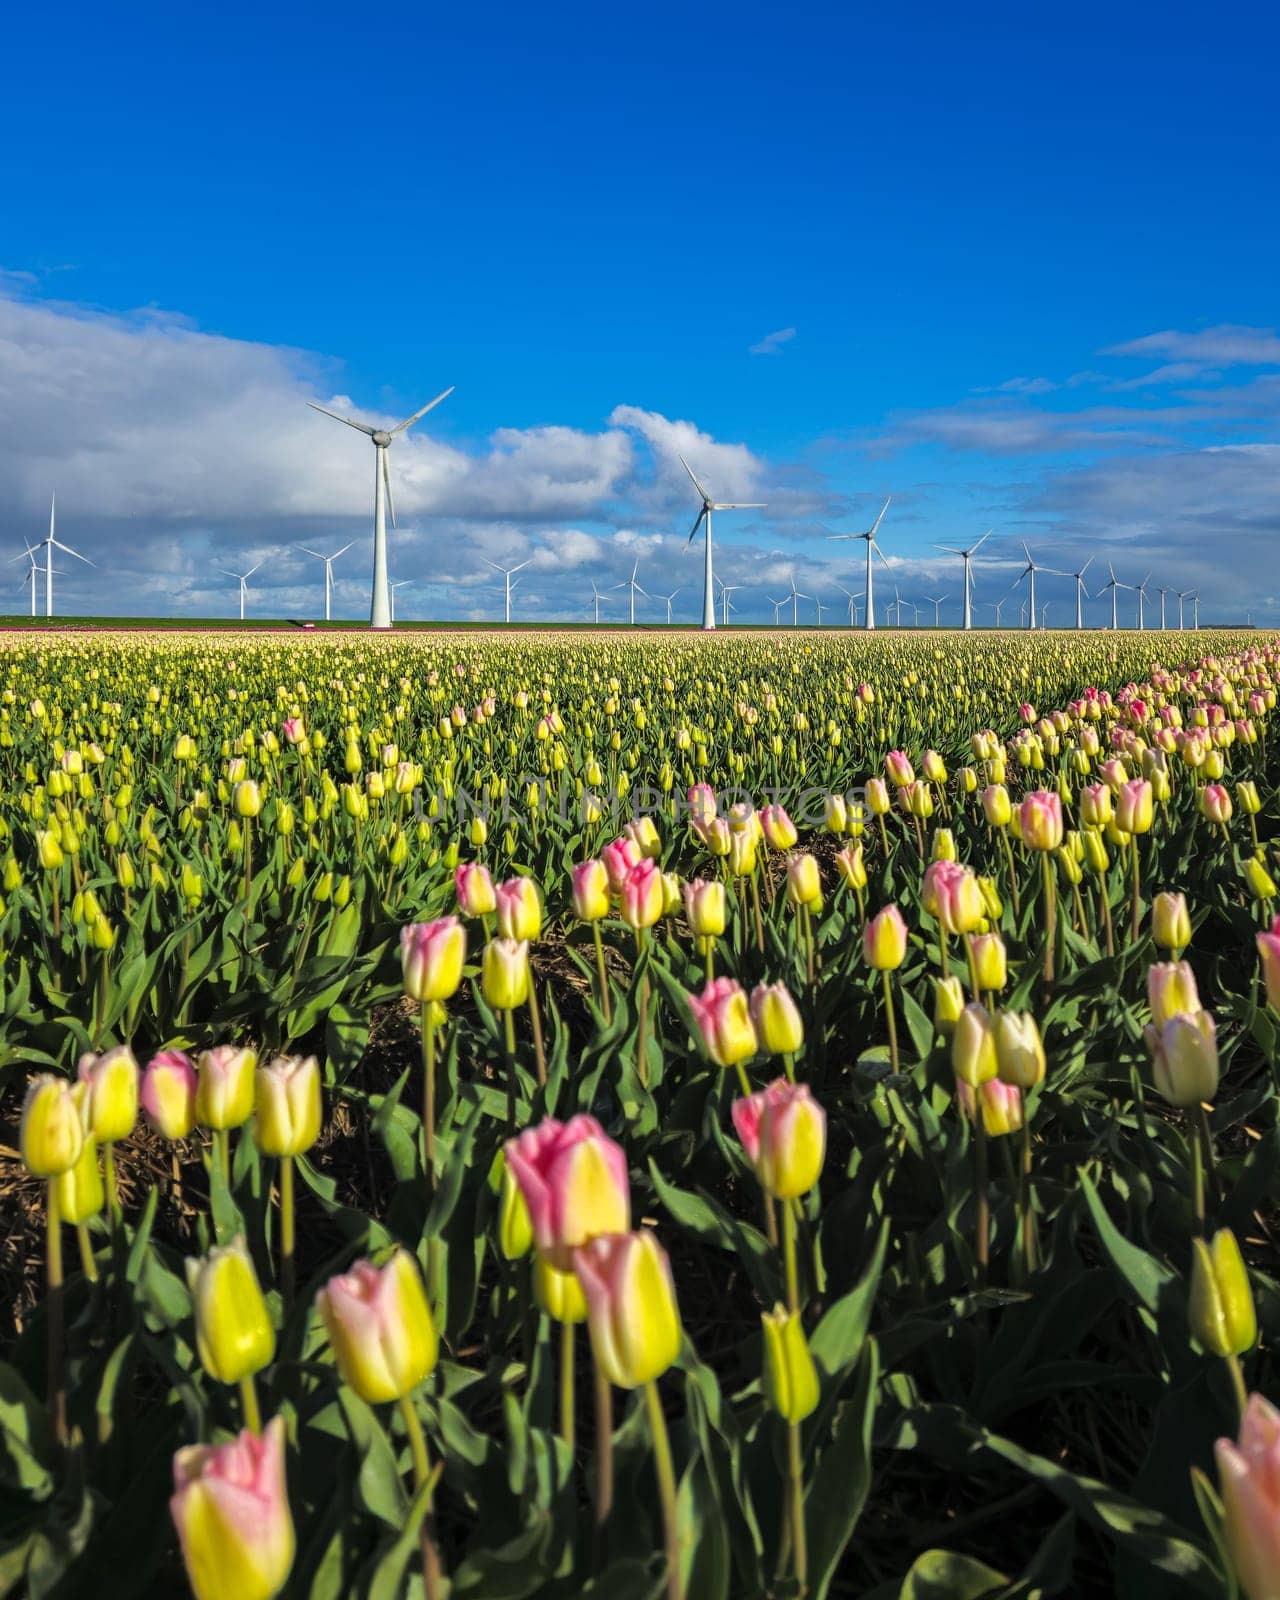 A field of budding tulips with towering windmills against a clear blue sky by fokkebok